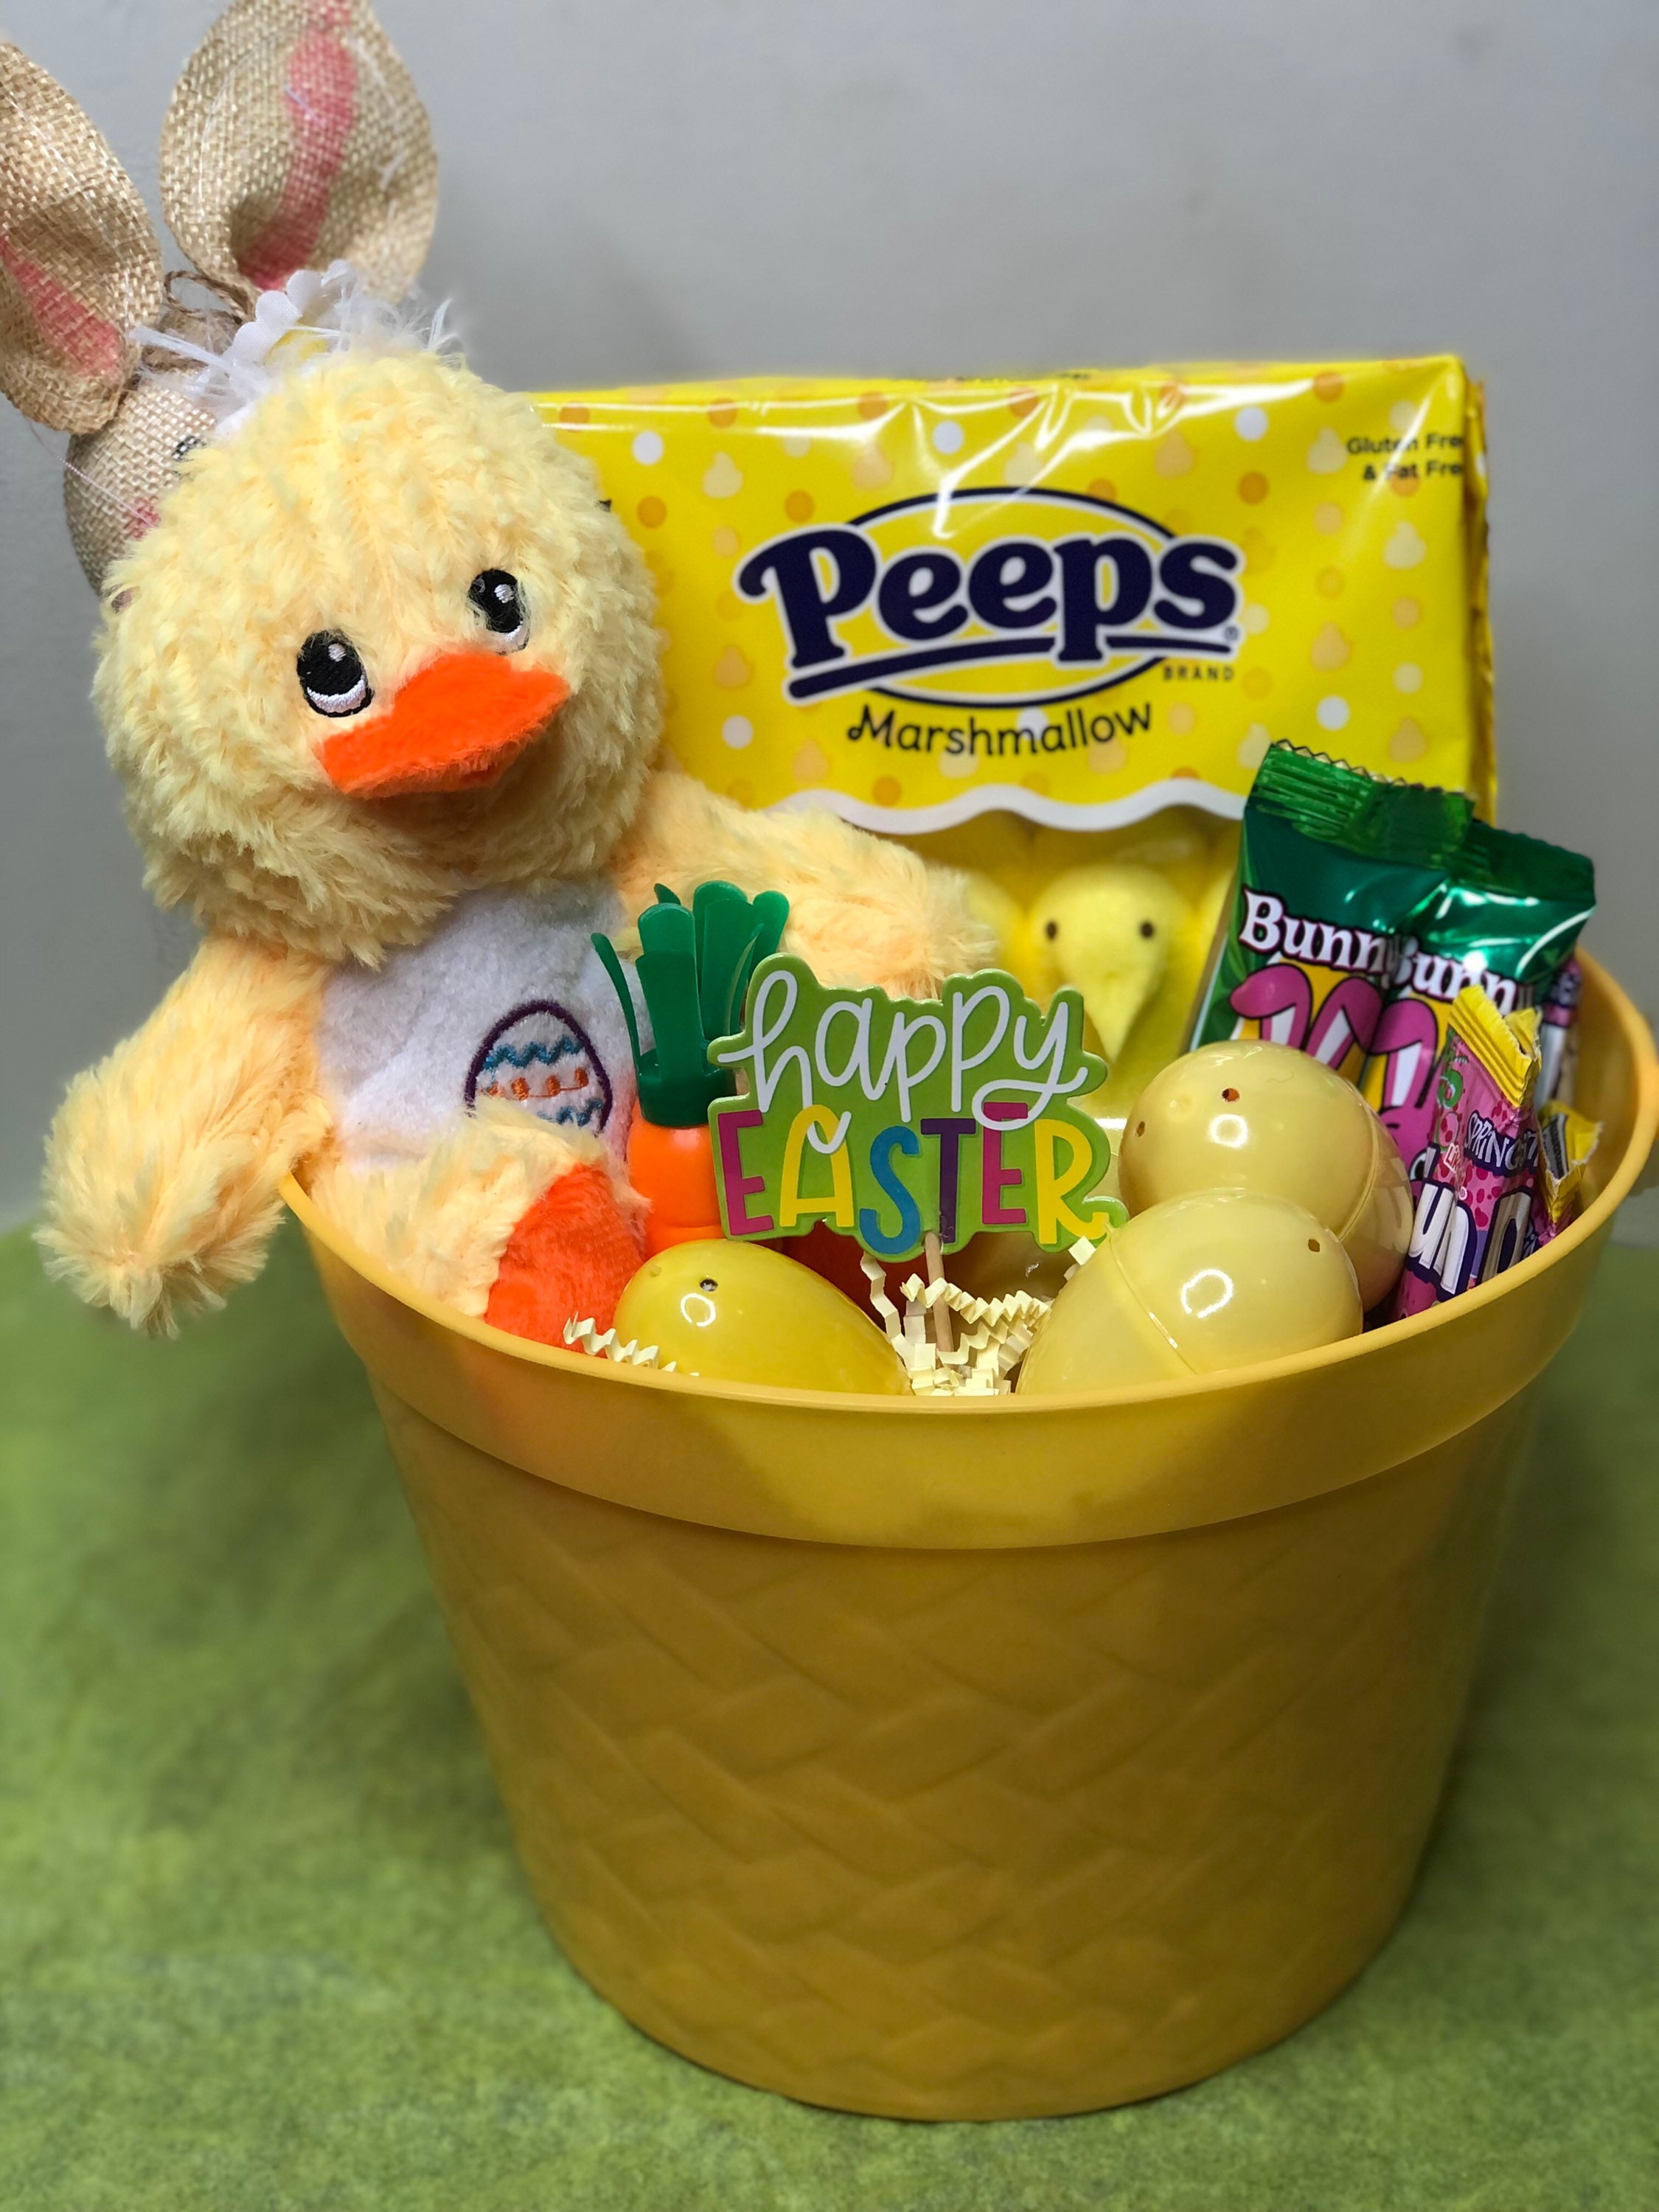 Bubble Gum Scented Peeps – The Gifted Basket